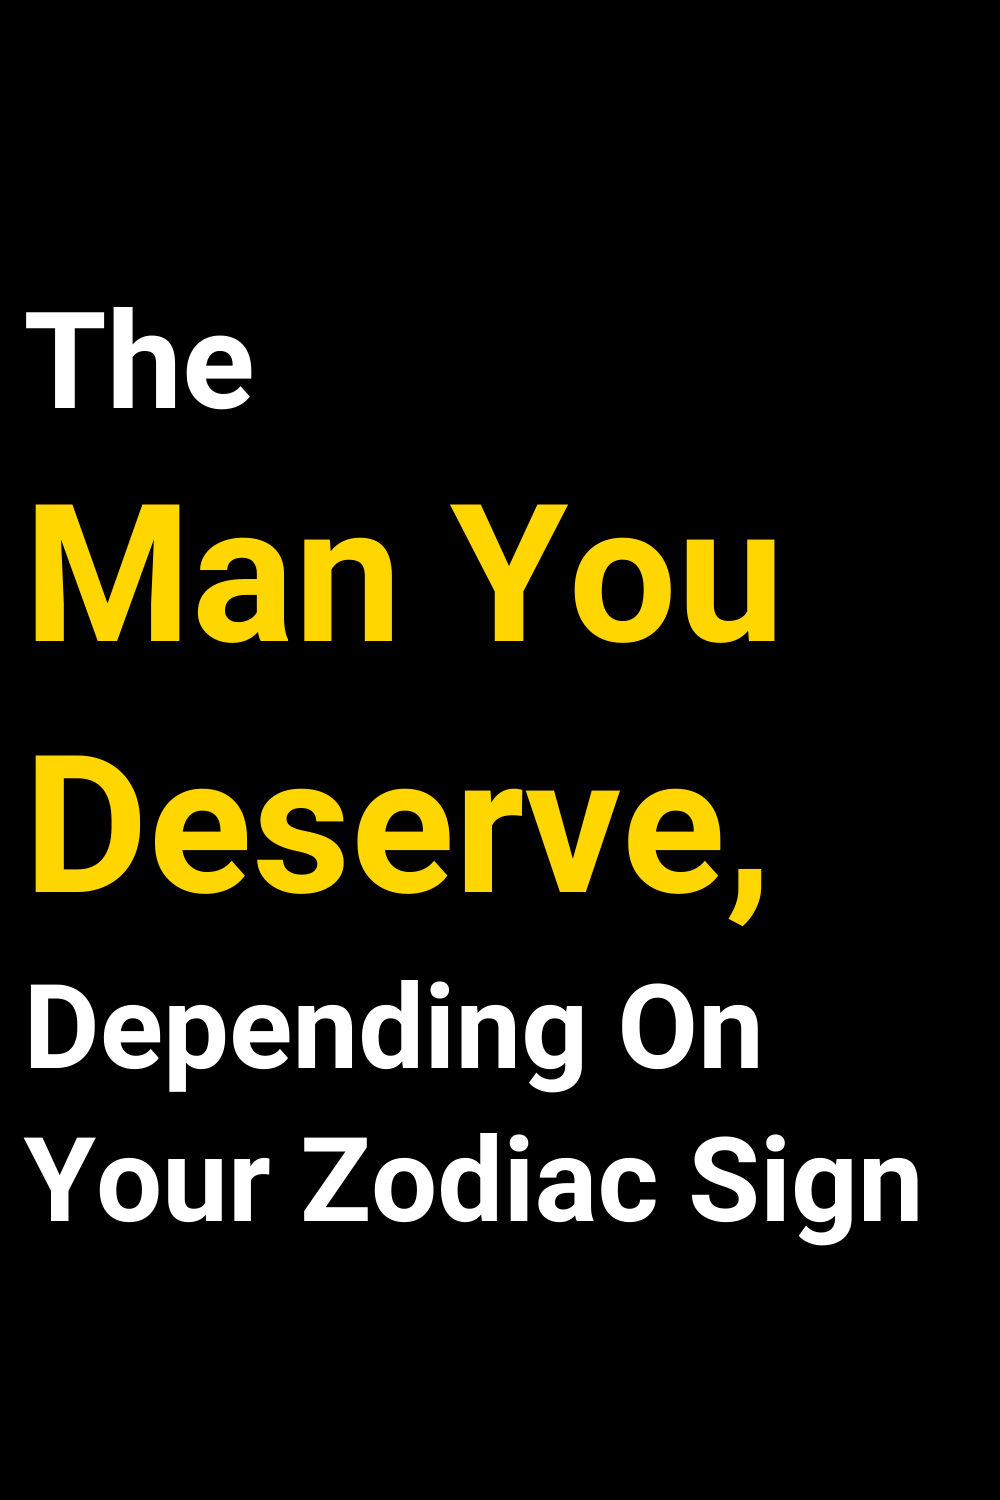 The Man You Deserve, Depending On Your Zodiac Sign